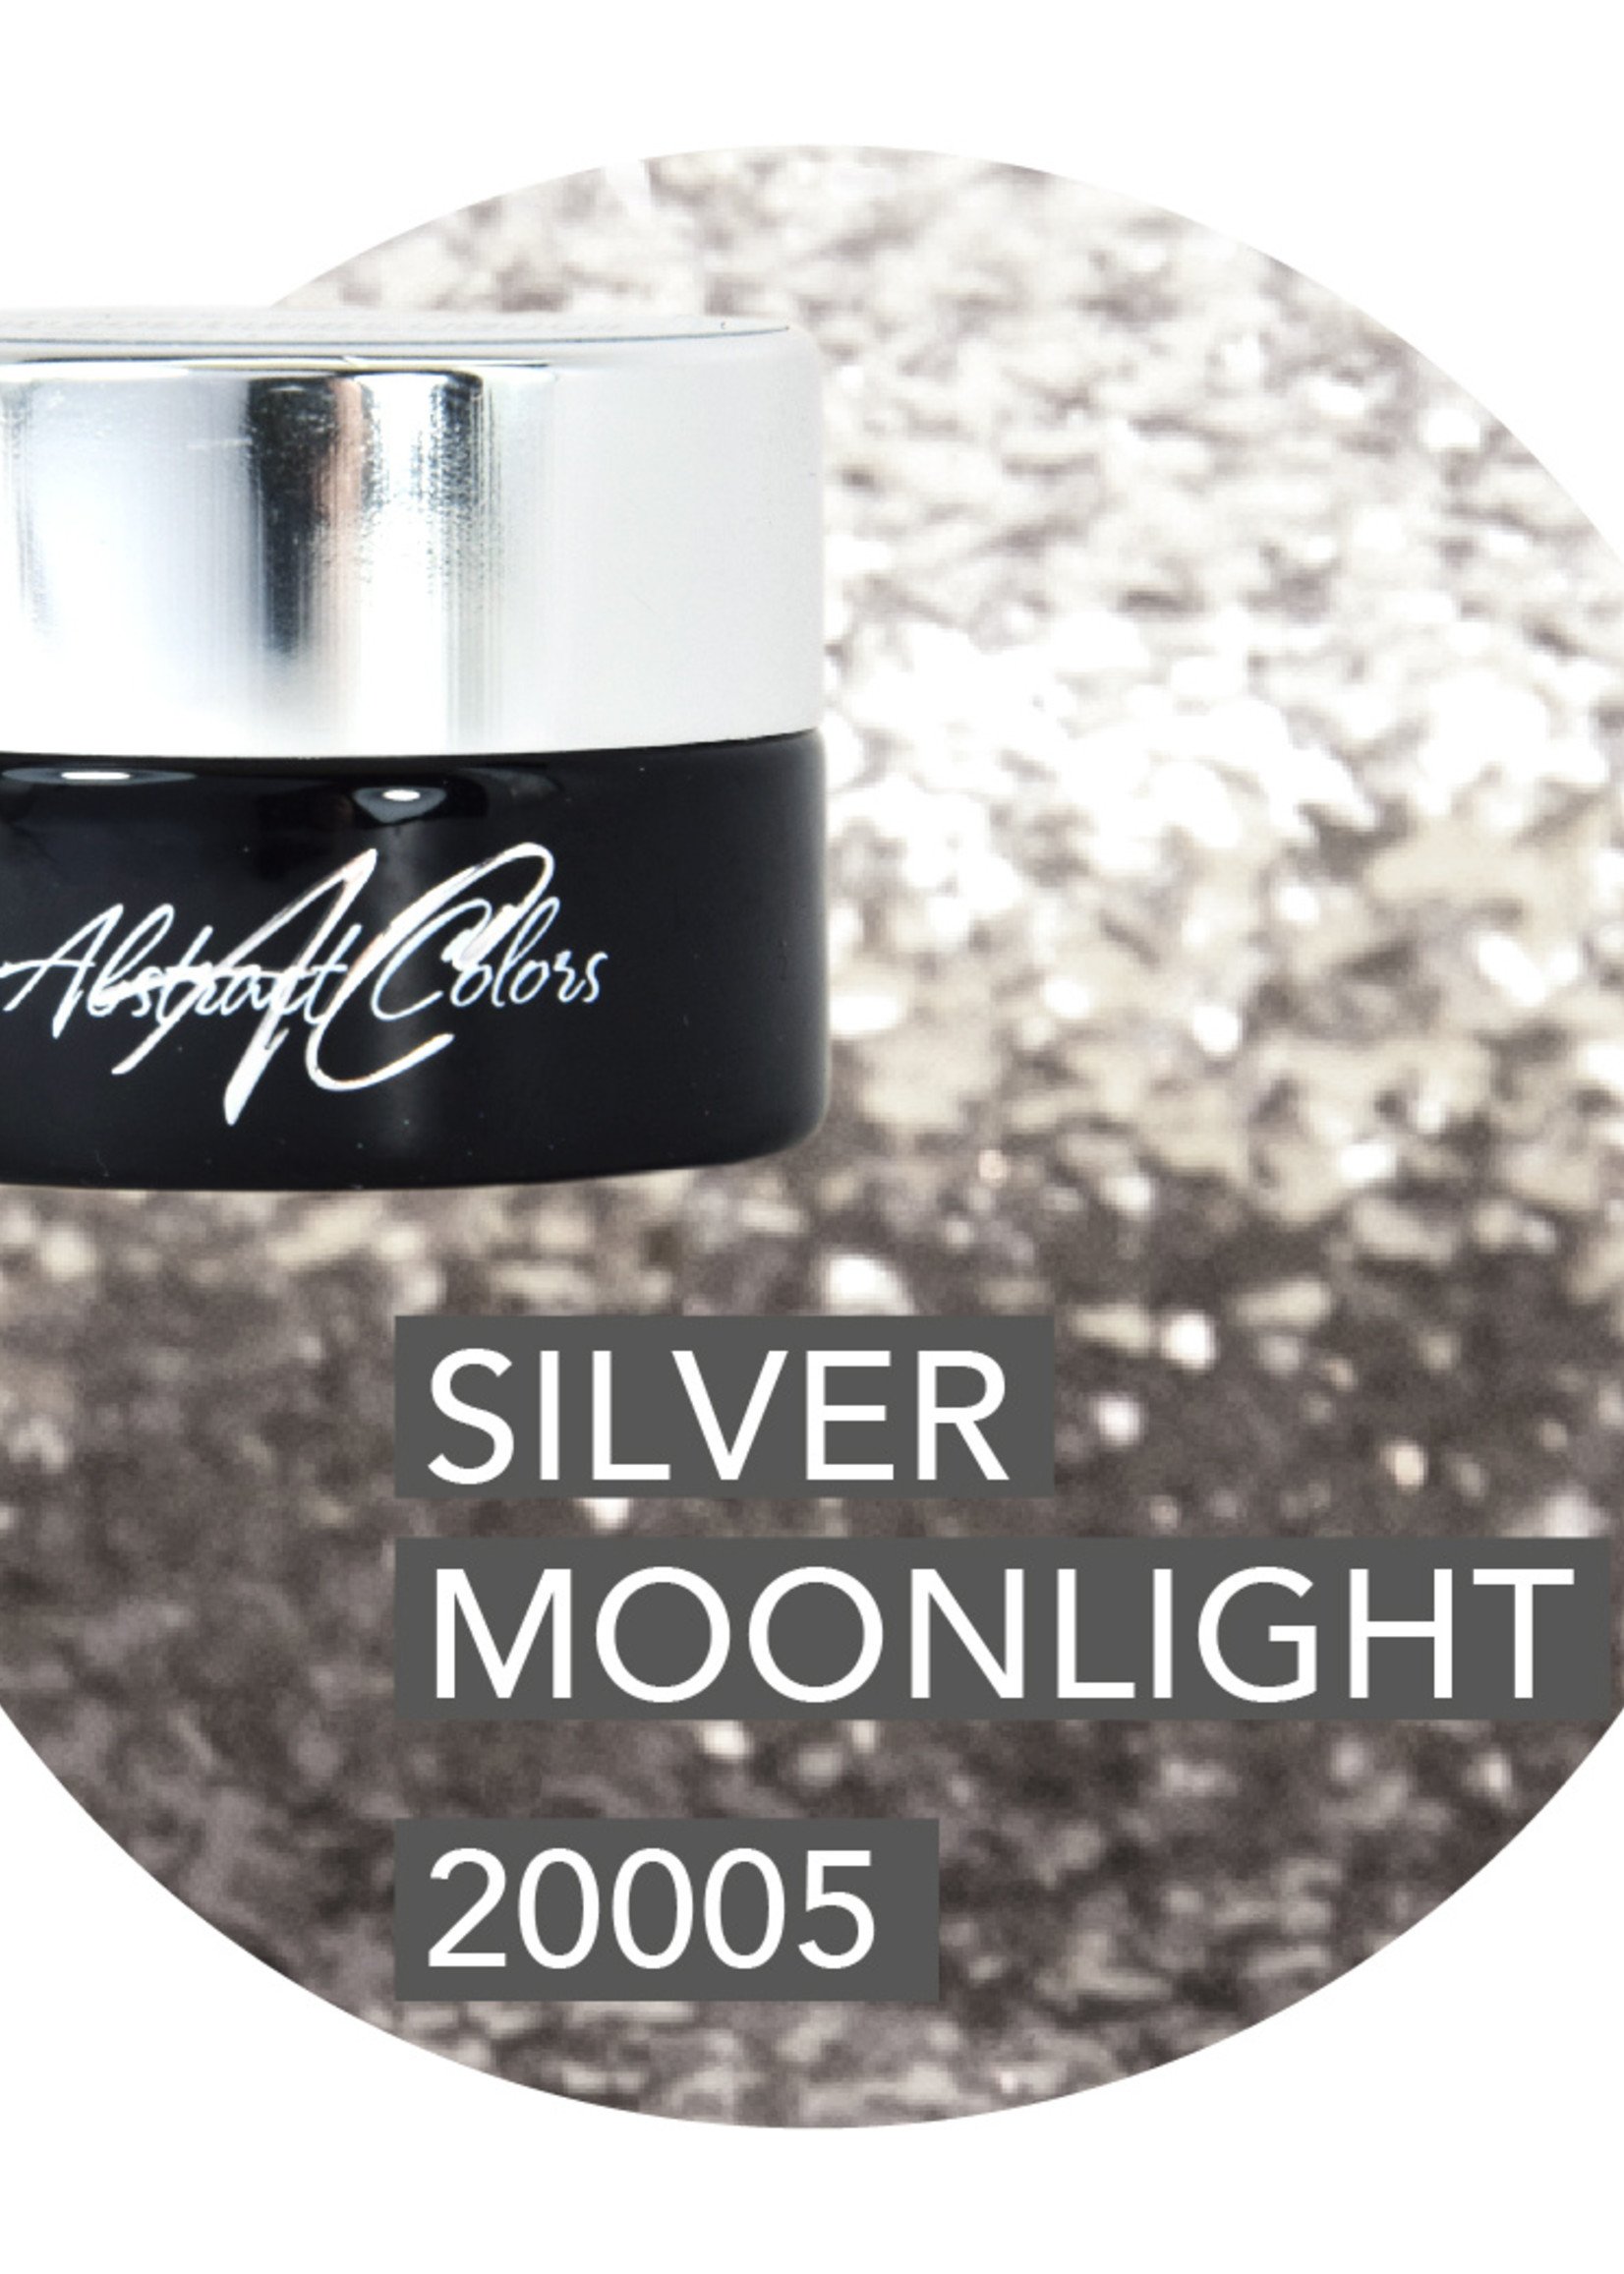 Abstract® Colorgel 5 ml Glitter Silver Moonlight